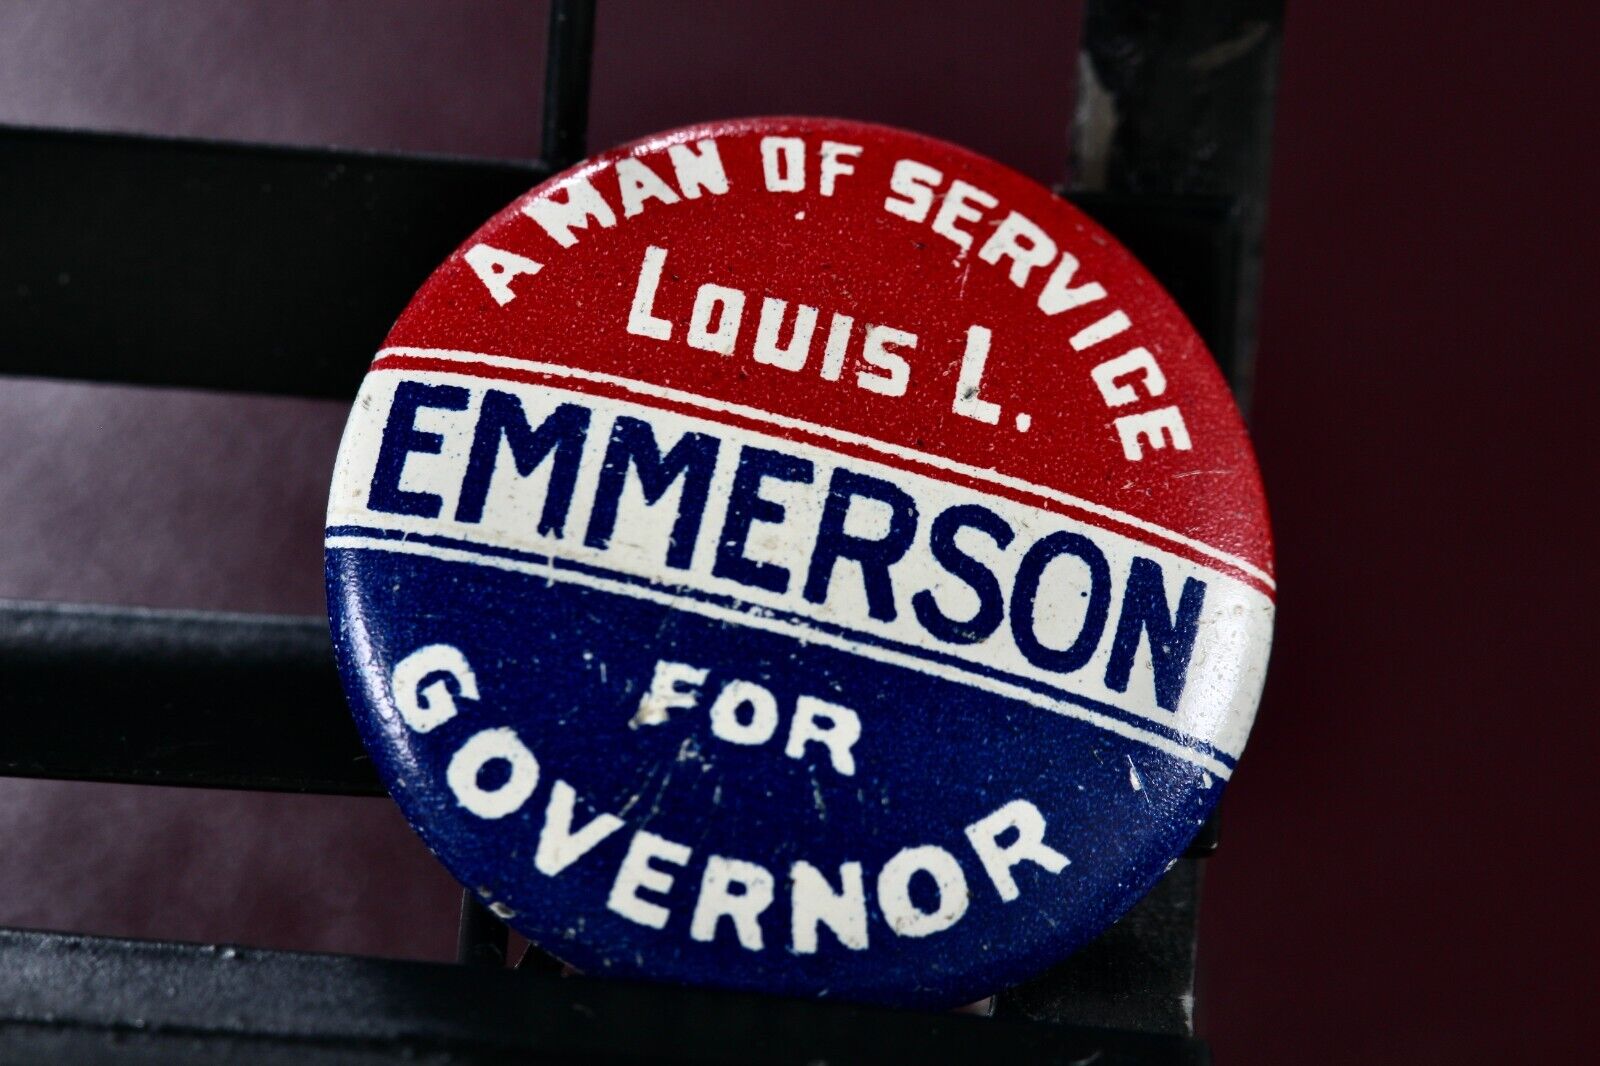 Louis L. Emmerson For Governor IL. \